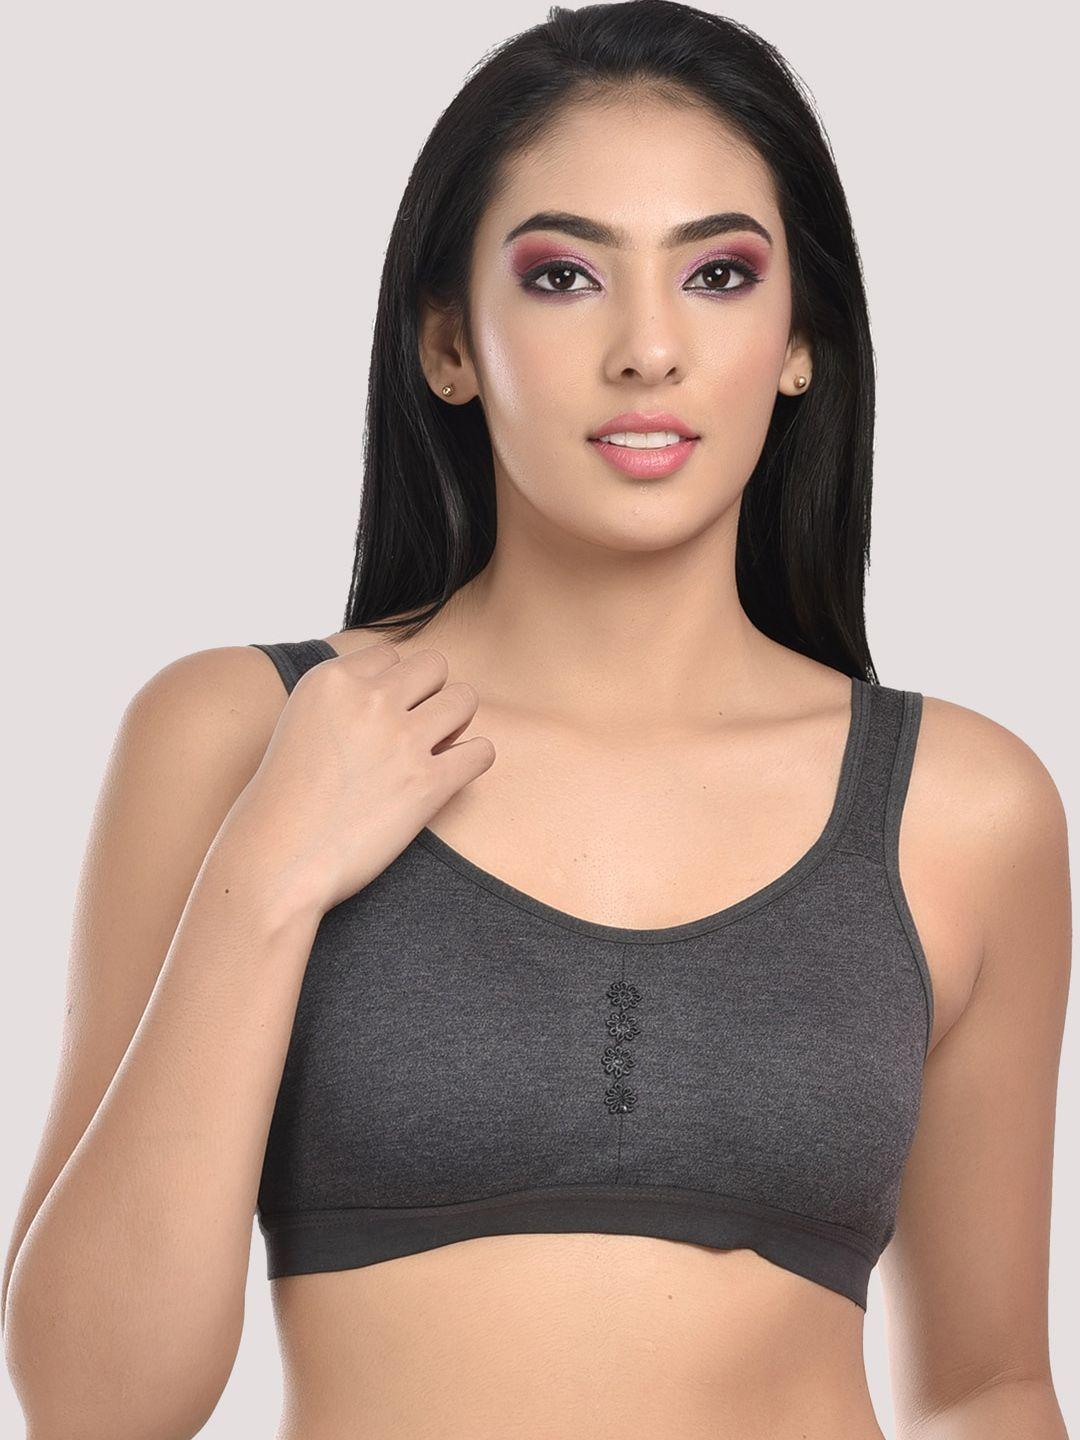 styfun charcoal non-padded & non-wired seamless bra